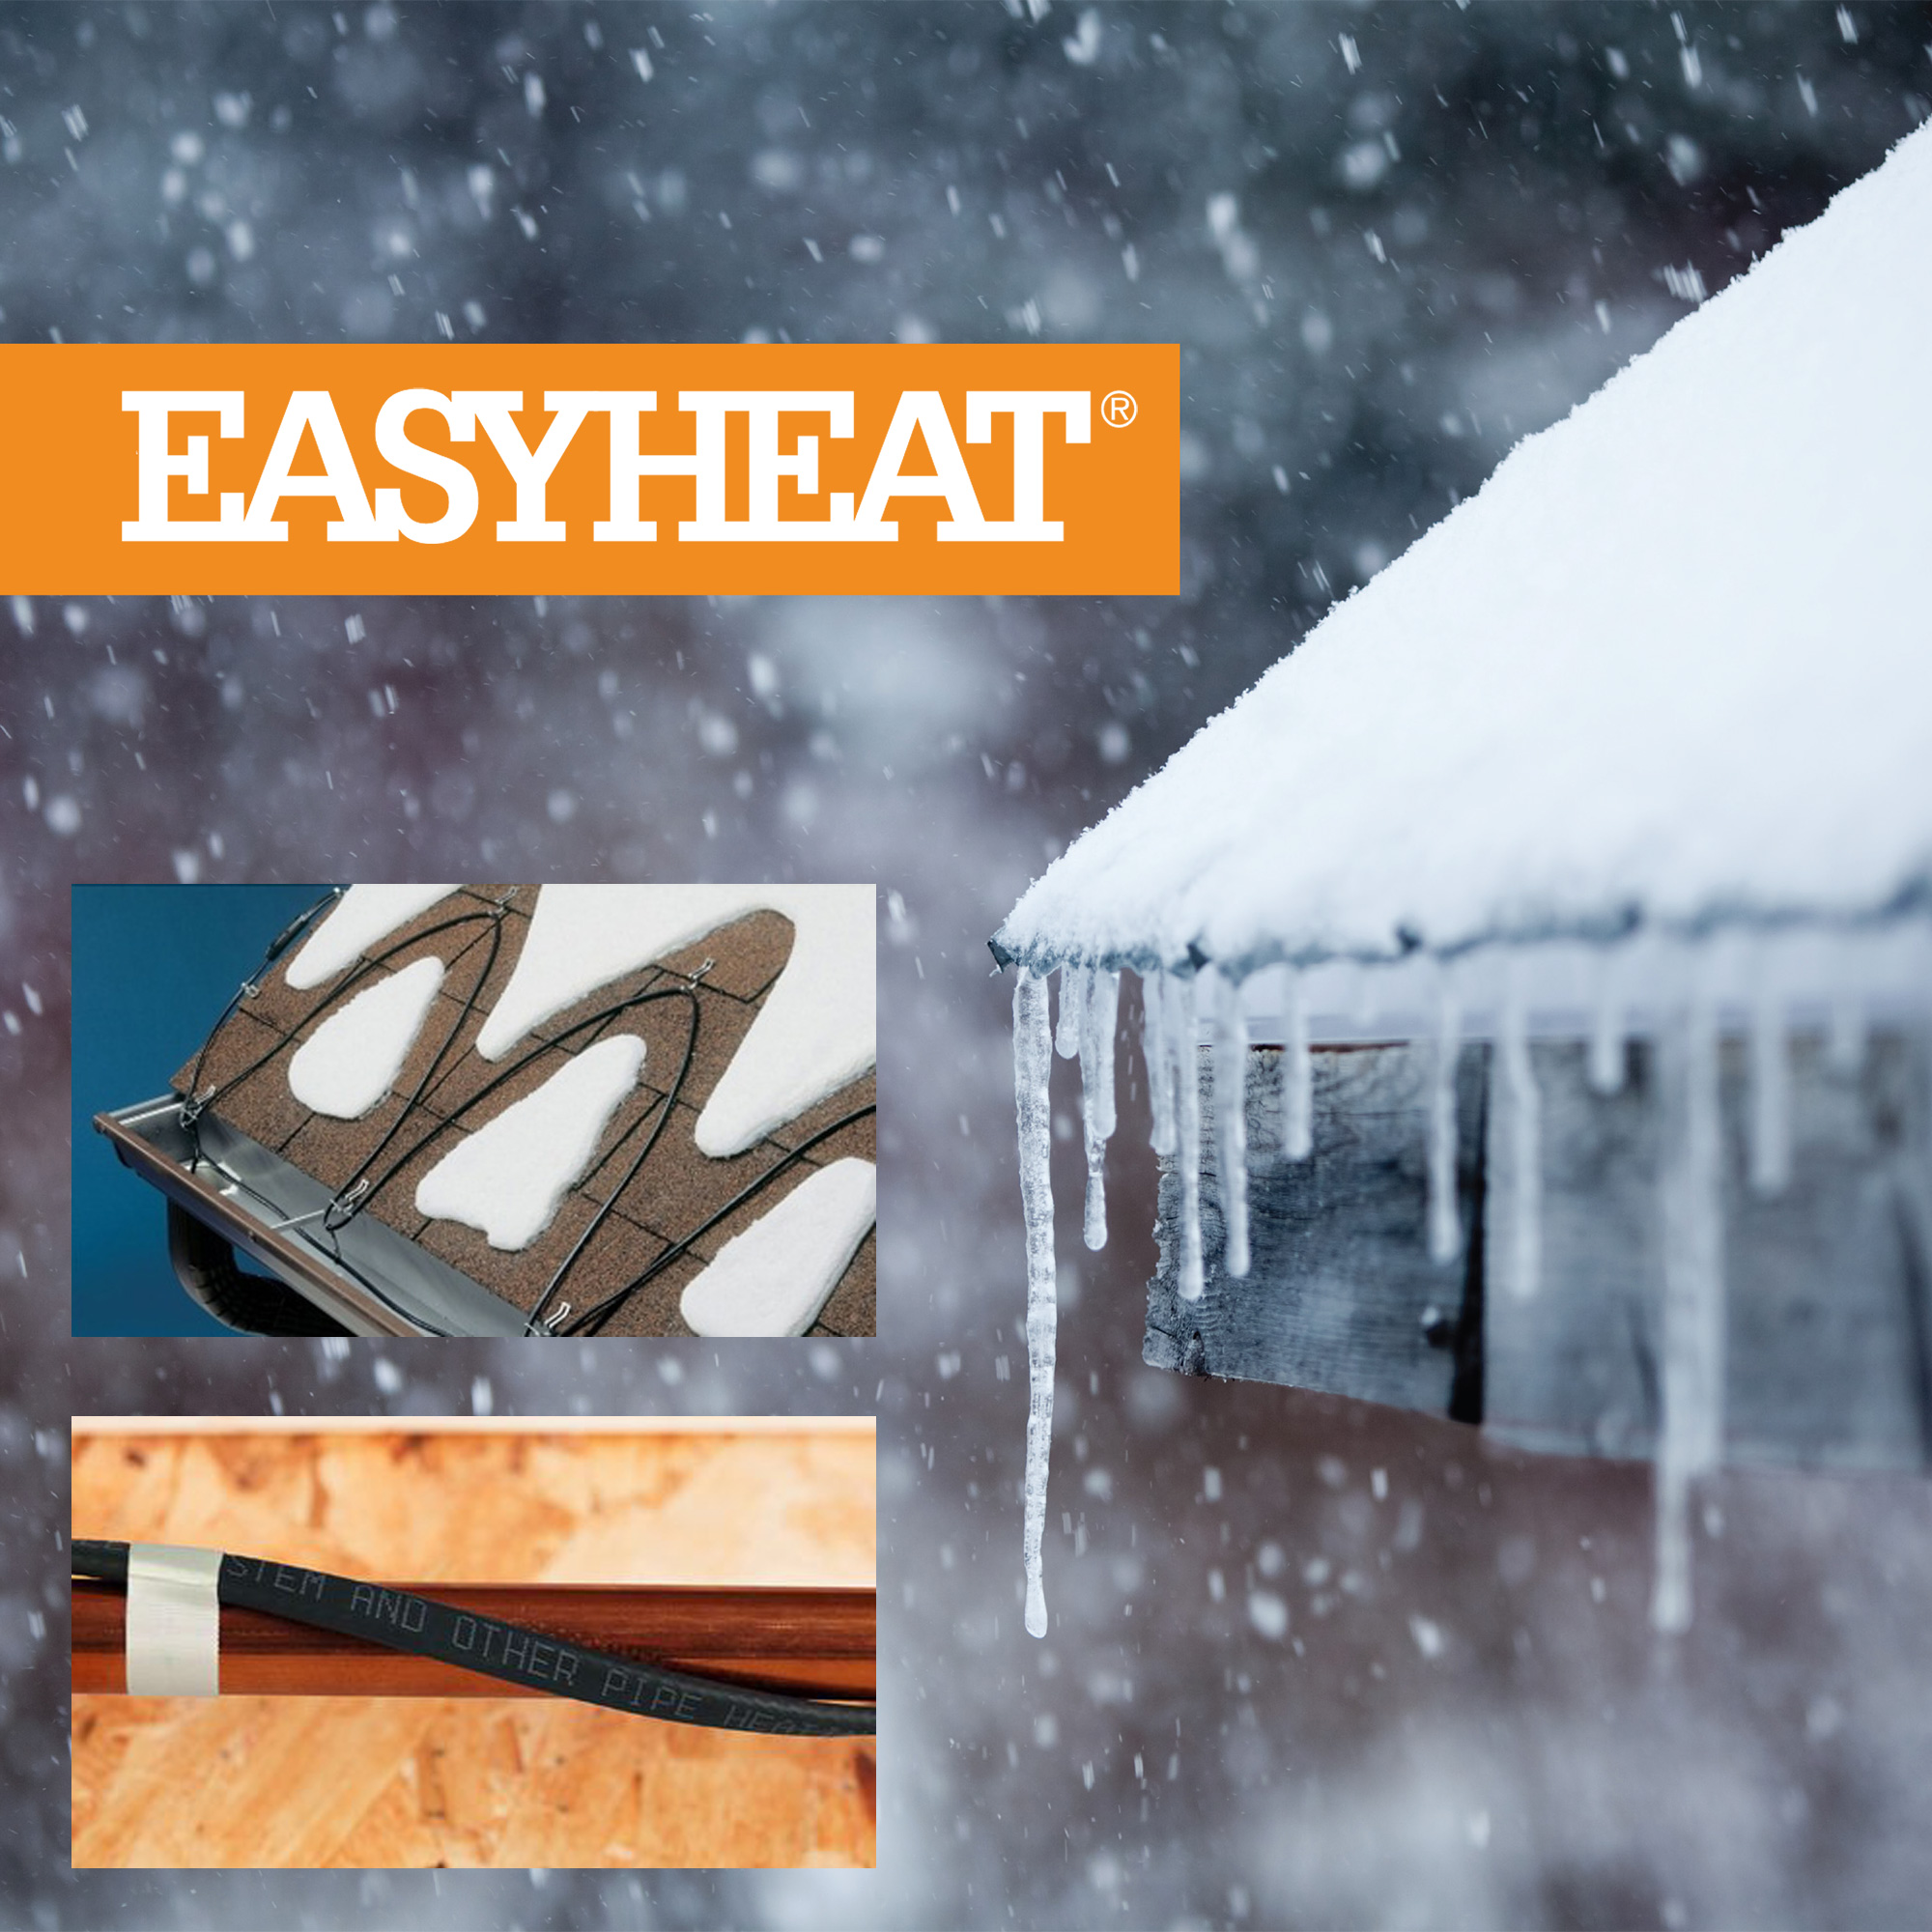 EasyHeat Residential and Commercial Solutions